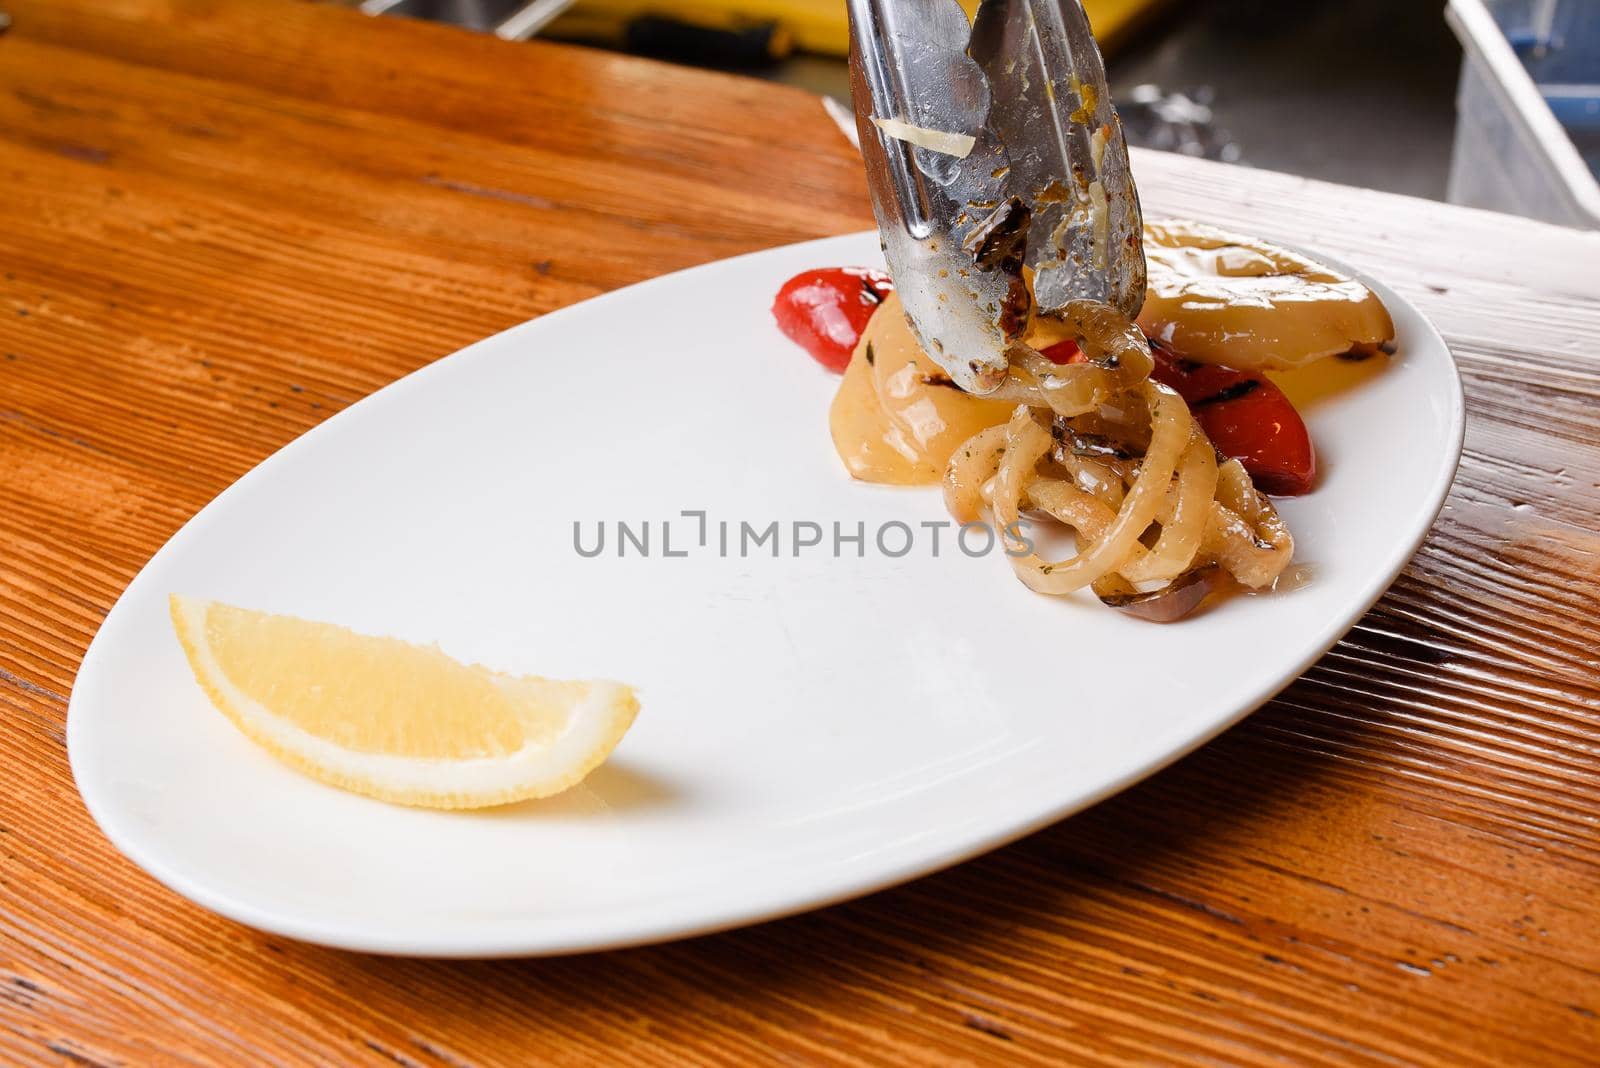 Grilled pepper and onion with lemon on a white plate on a wooden table. Serving the dish with metal tongs.